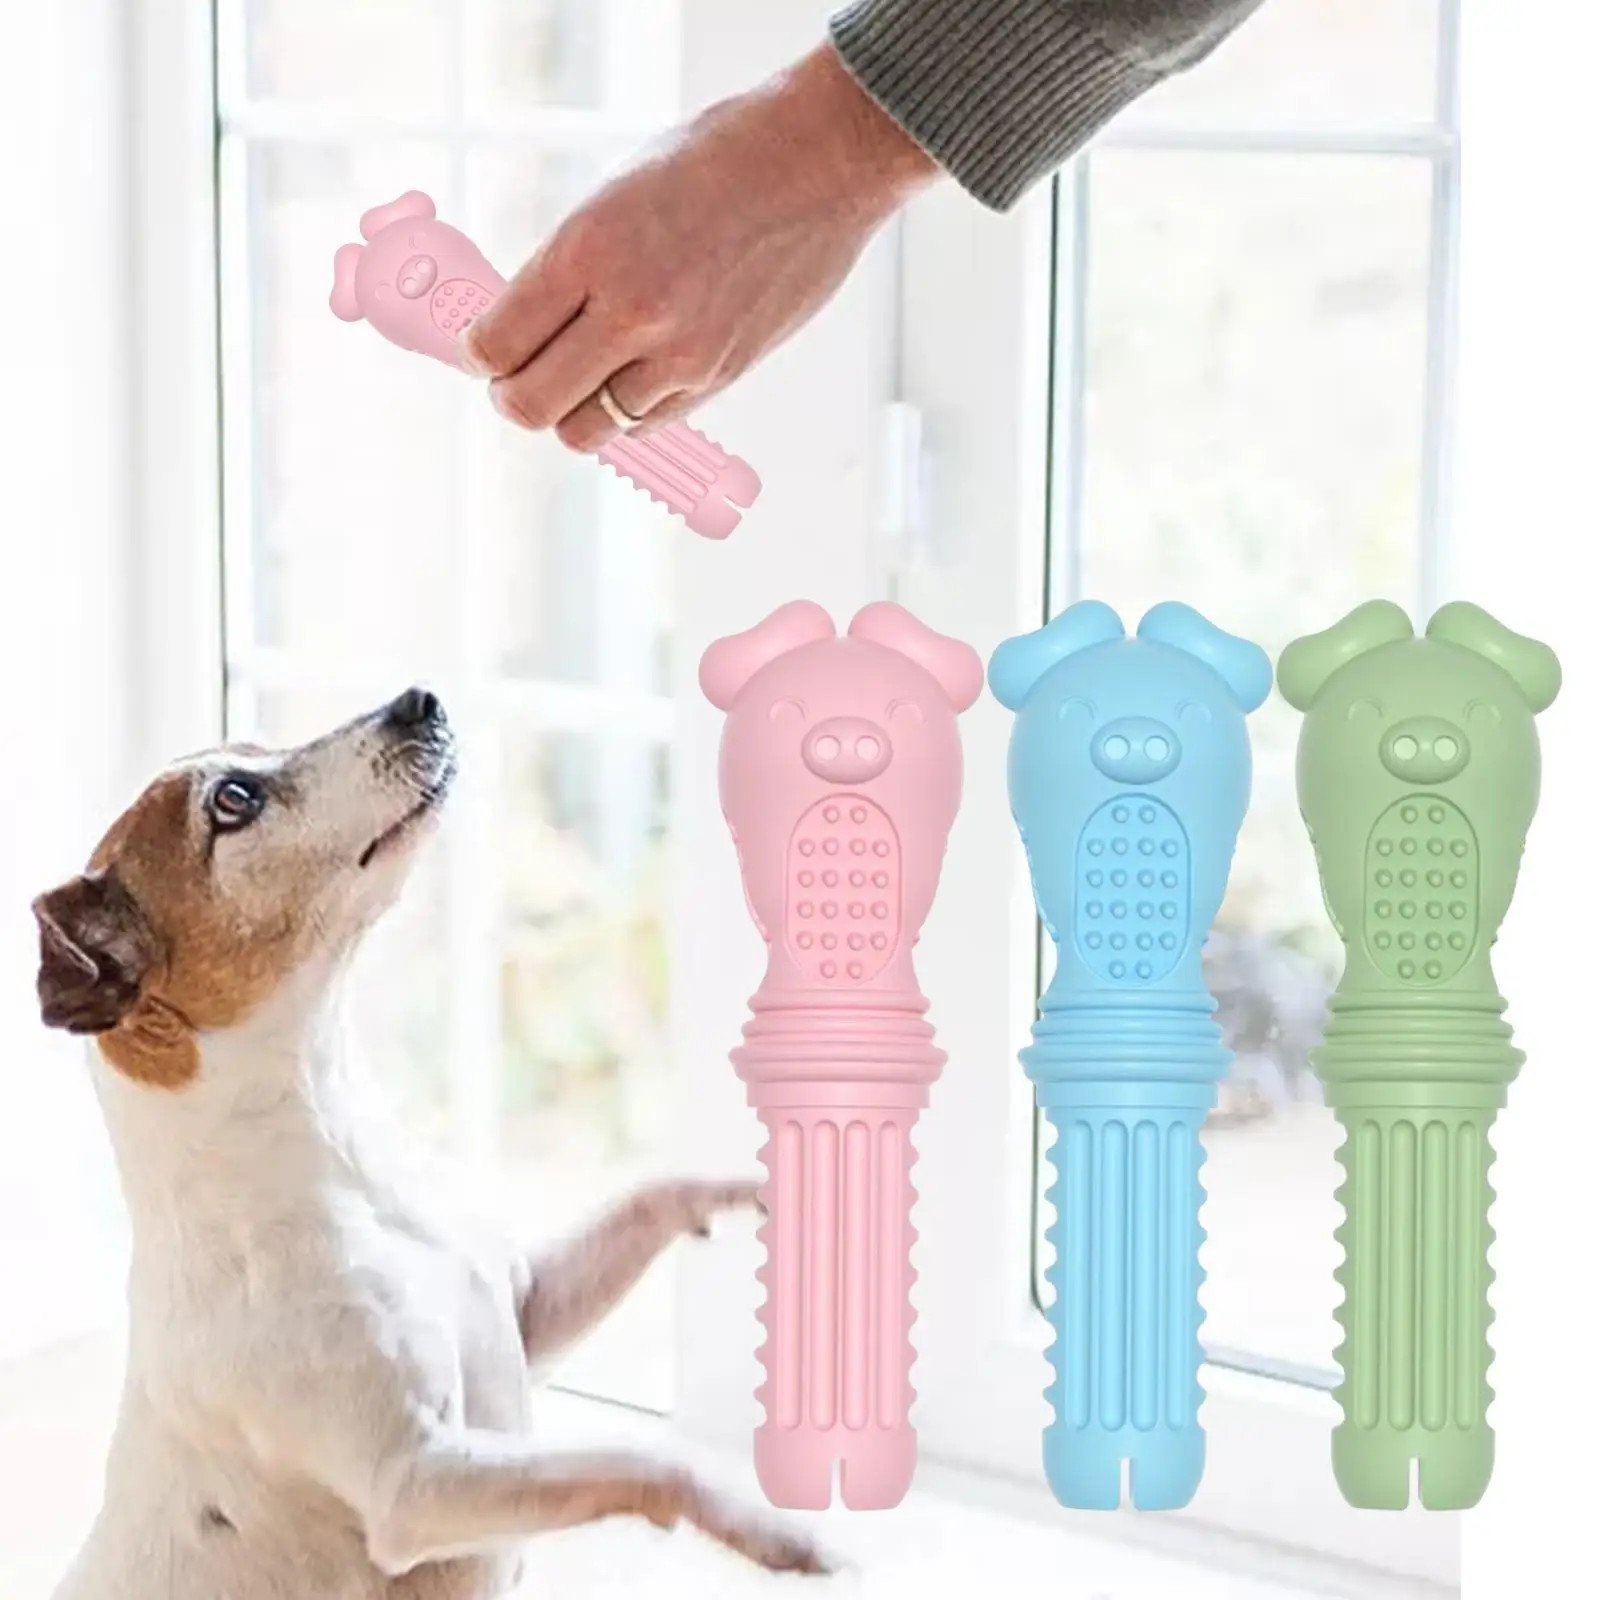 Dog Chew Toy Interactive Training Toy for Aggressive Chewers Kitten Toy Cleaning Puppy Chewing Durable Playing Supplies